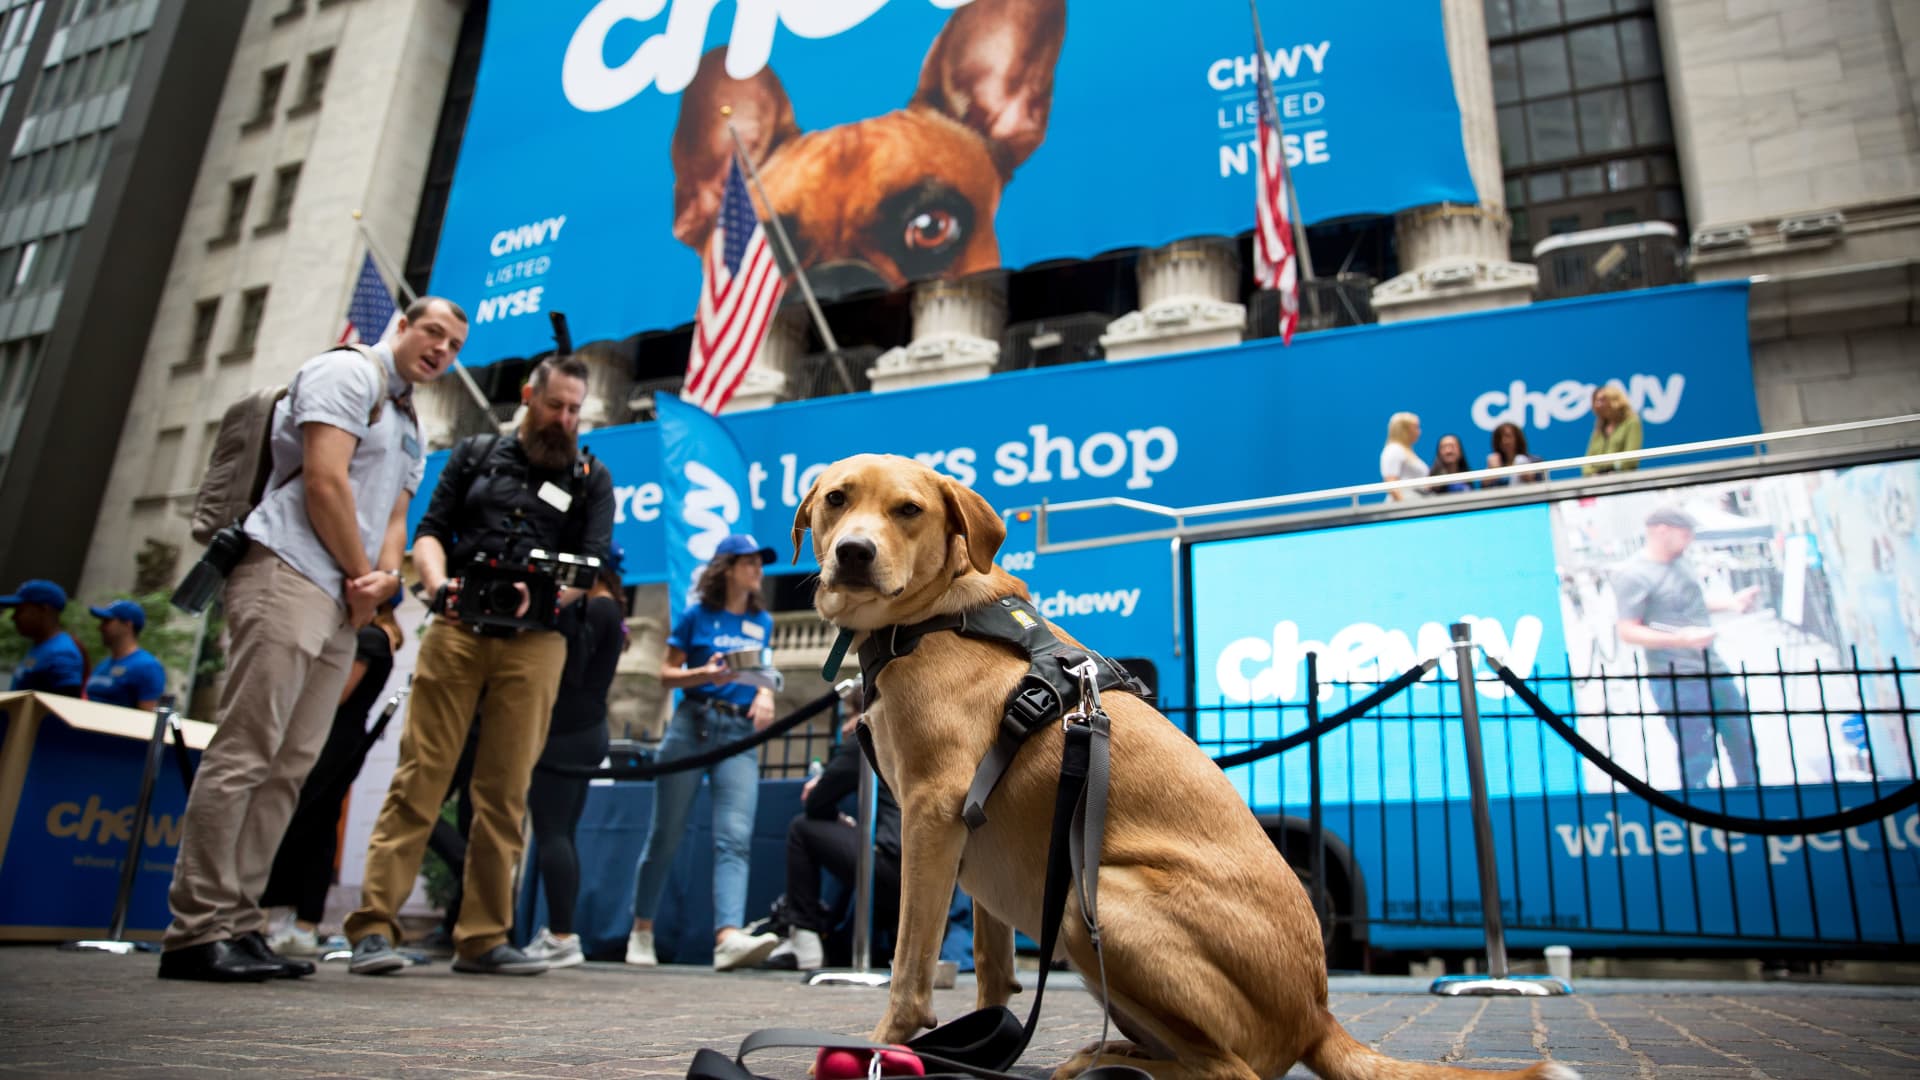 Needham upgrades Chewy, says shares can rally more than 40% because the pet space is defensive